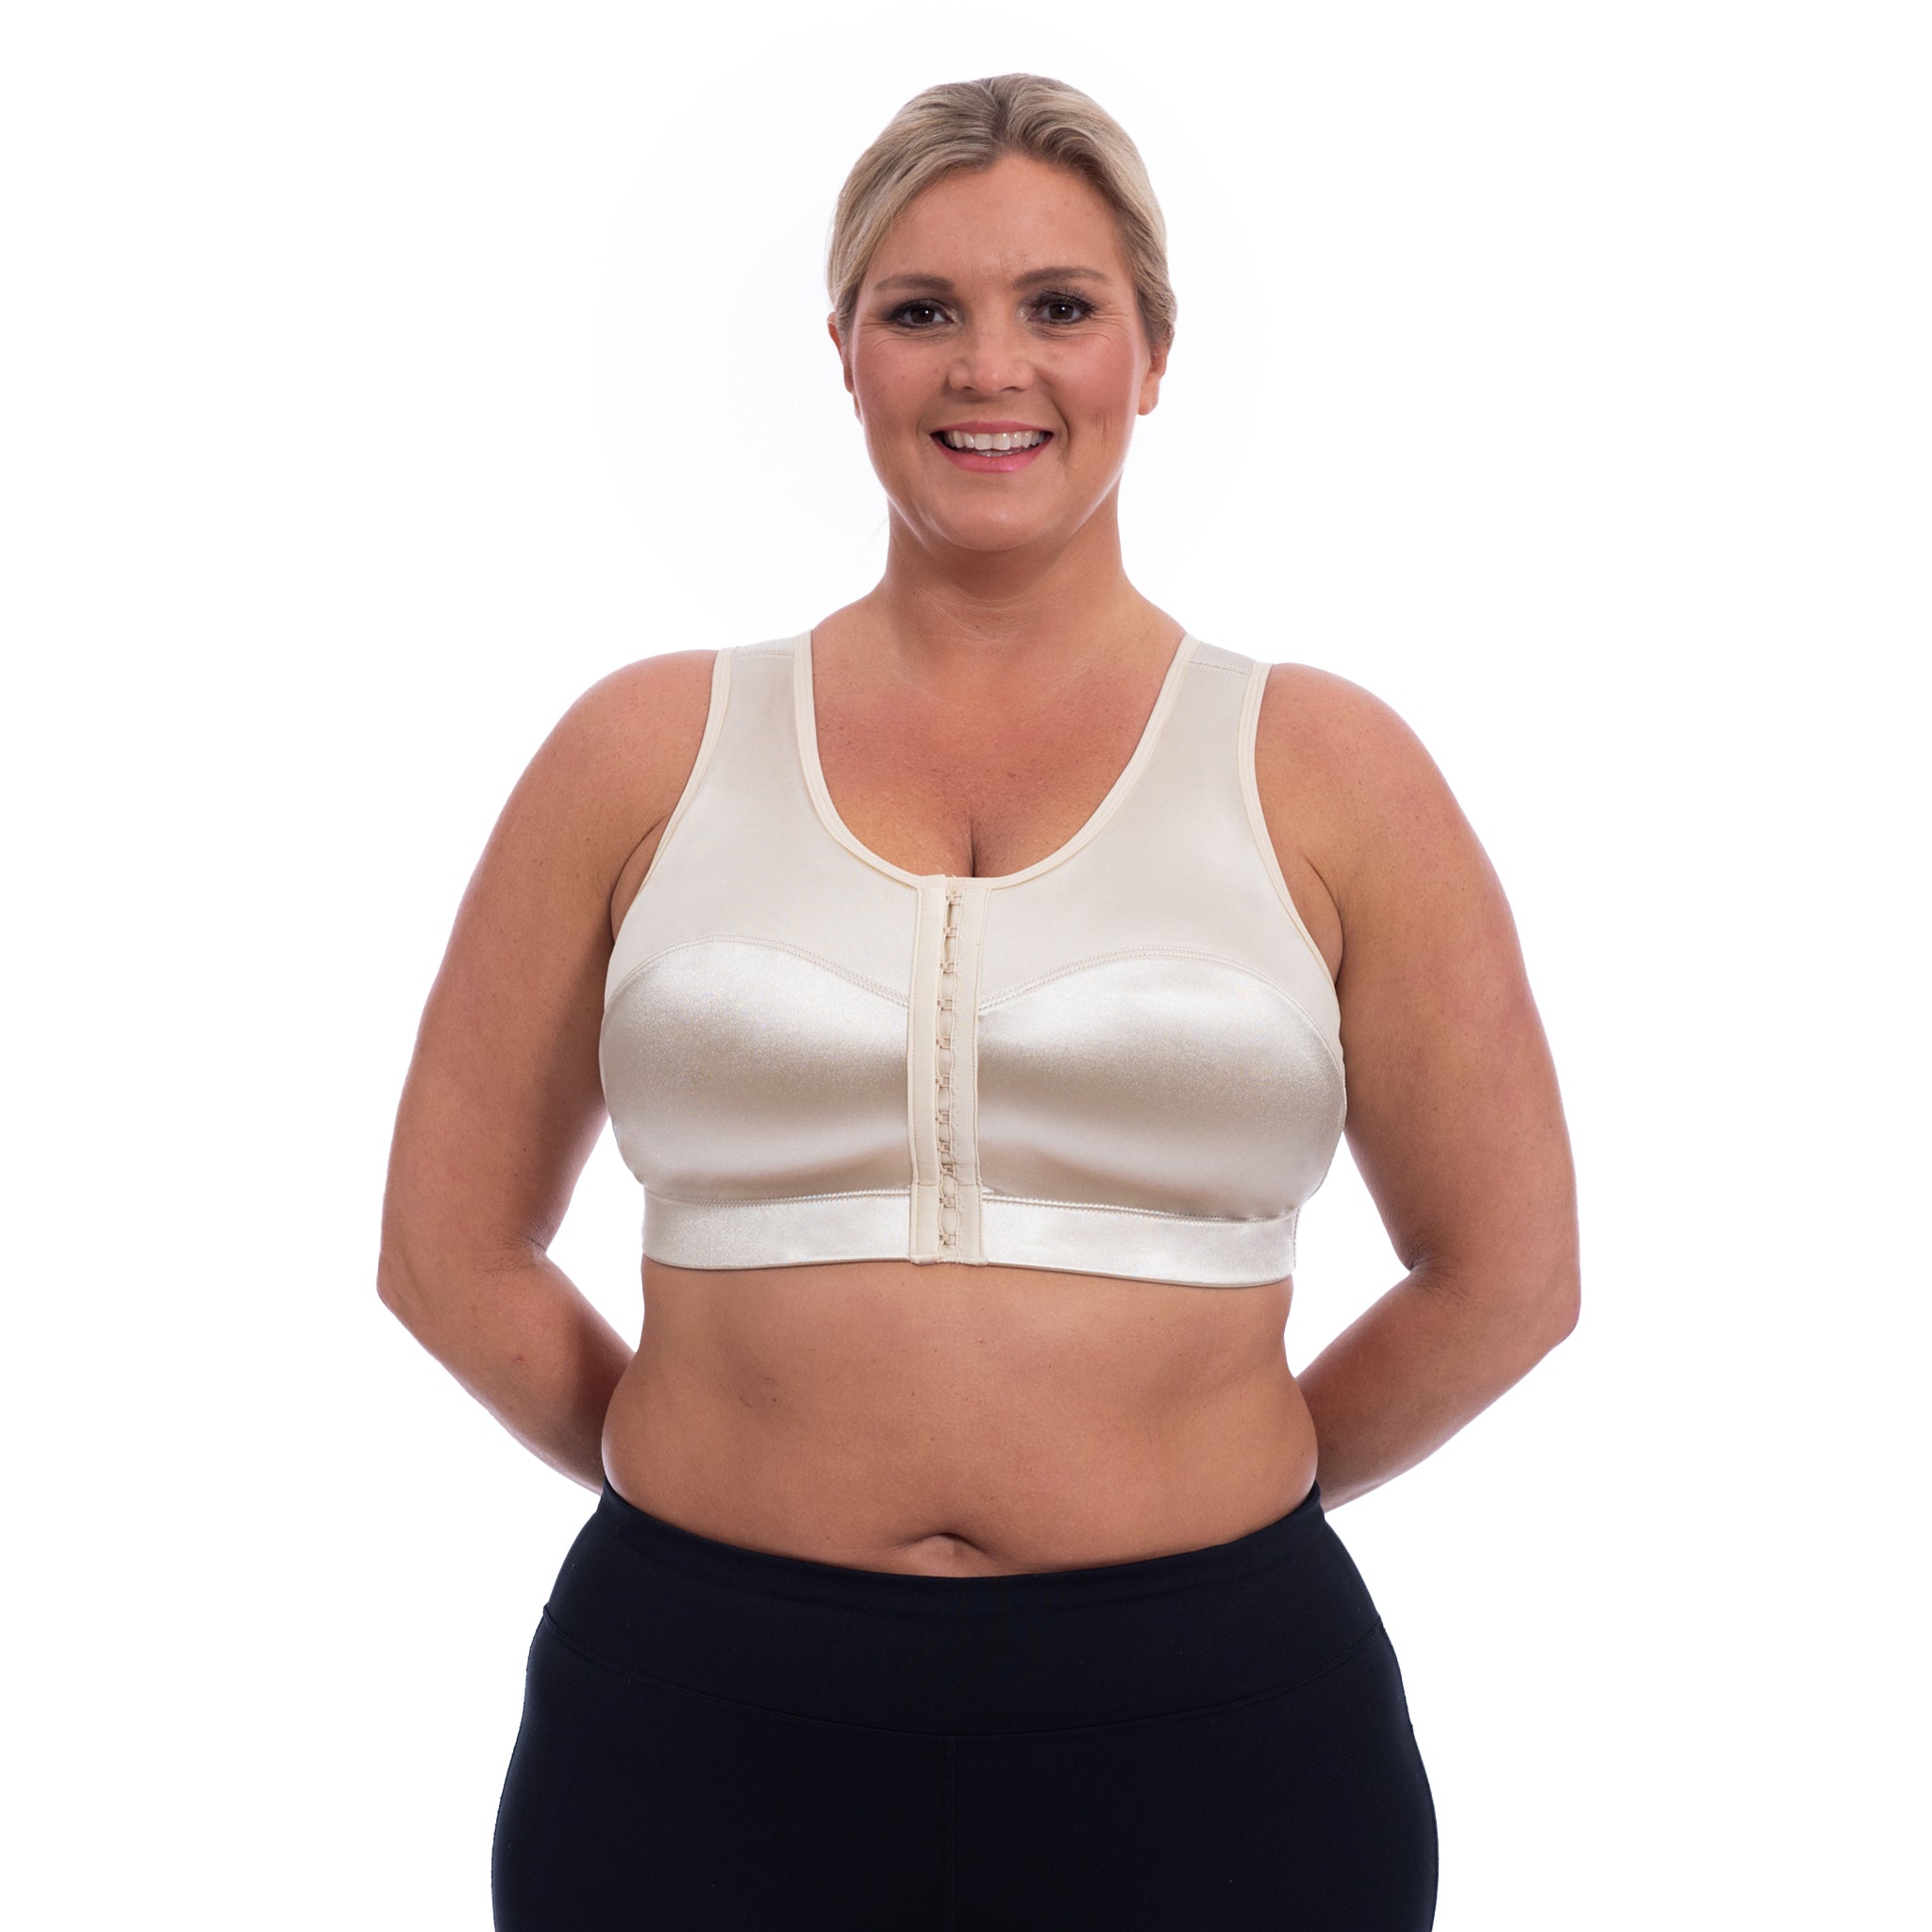 Whenever someone asks why all ENELL bras have front closures, we